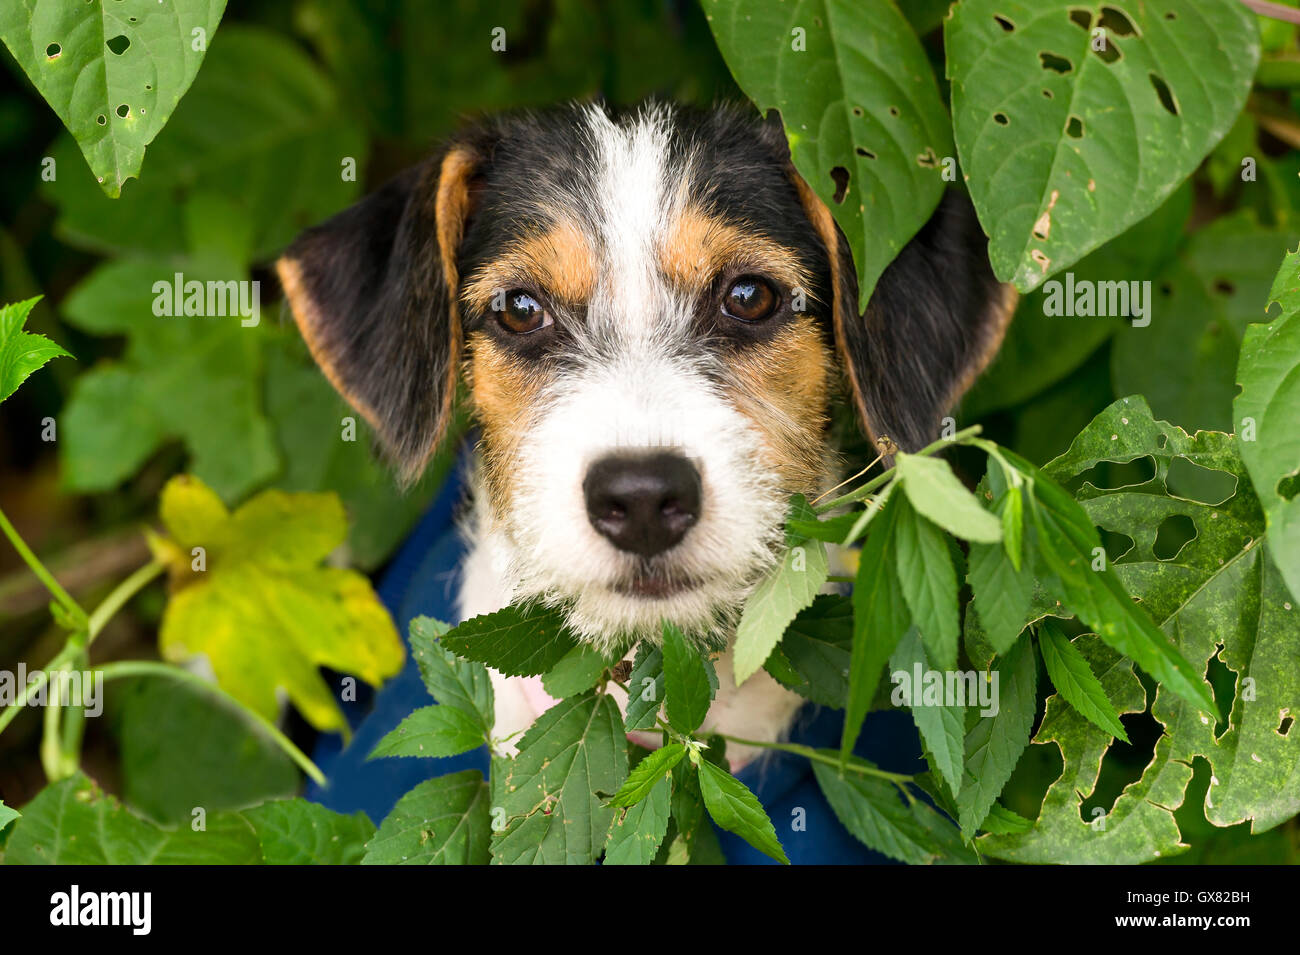 Puppy is an adorable puppy dog face outdoors with big brown adorable eyes. Stock Photo